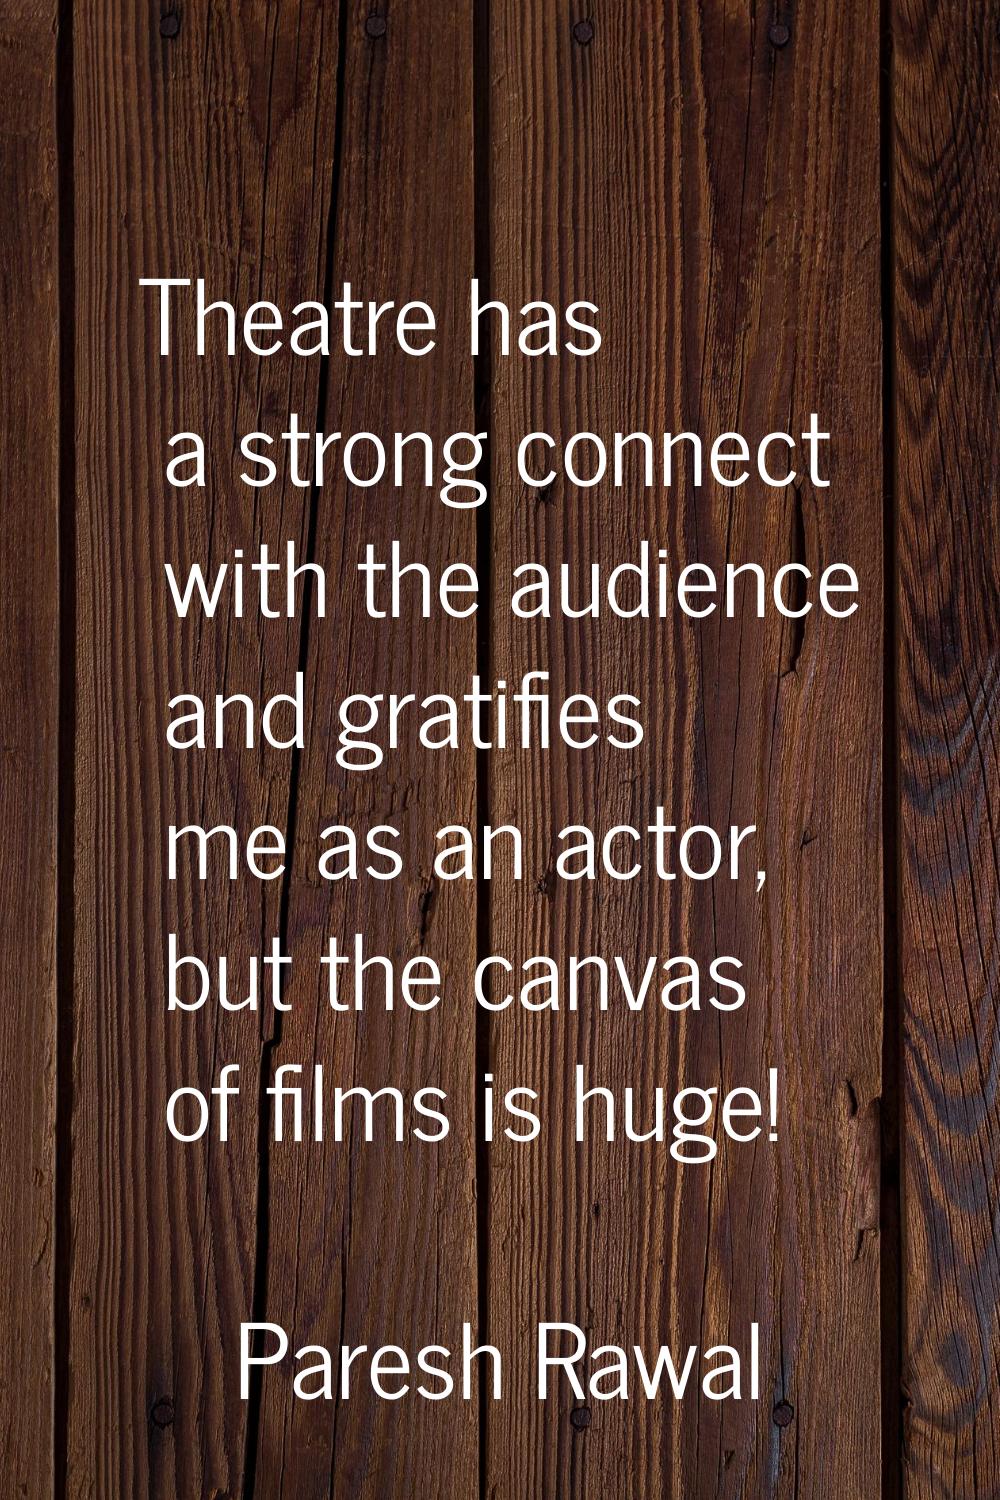 Theatre has a strong connect with the audience and gratifies me as an actor, but the canvas of film